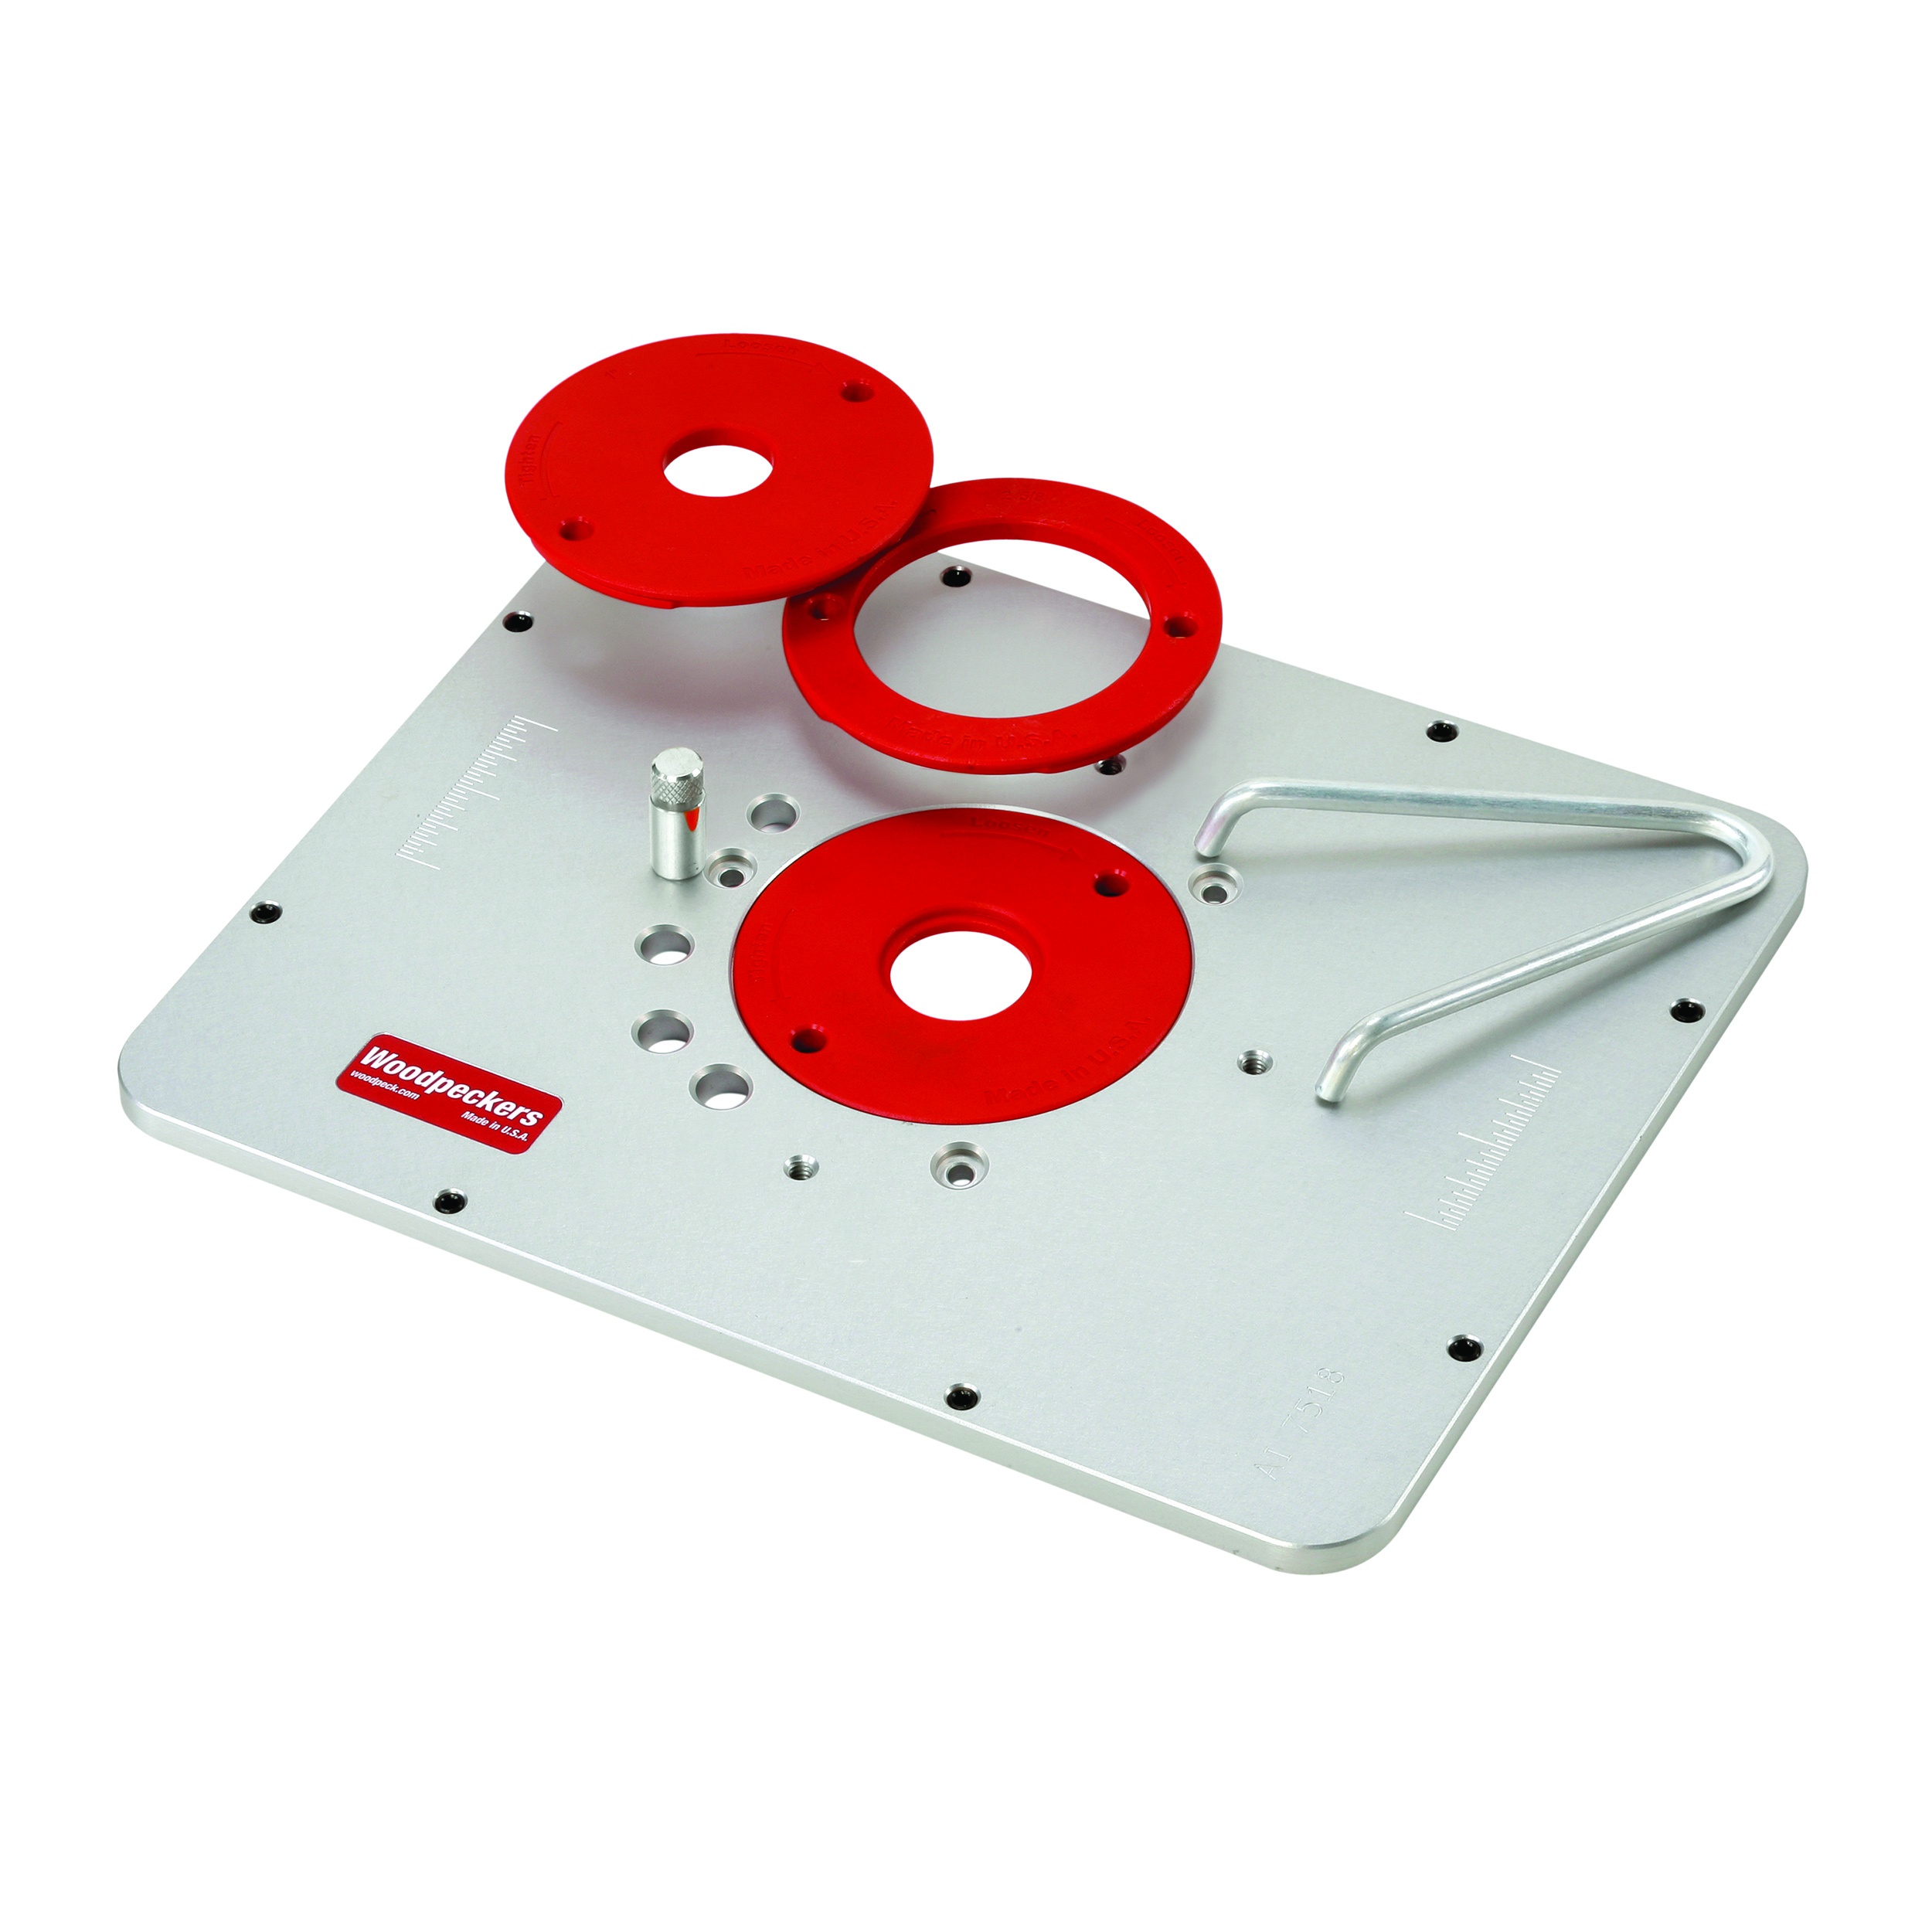 Aluminum Router Plate For Pc690/890